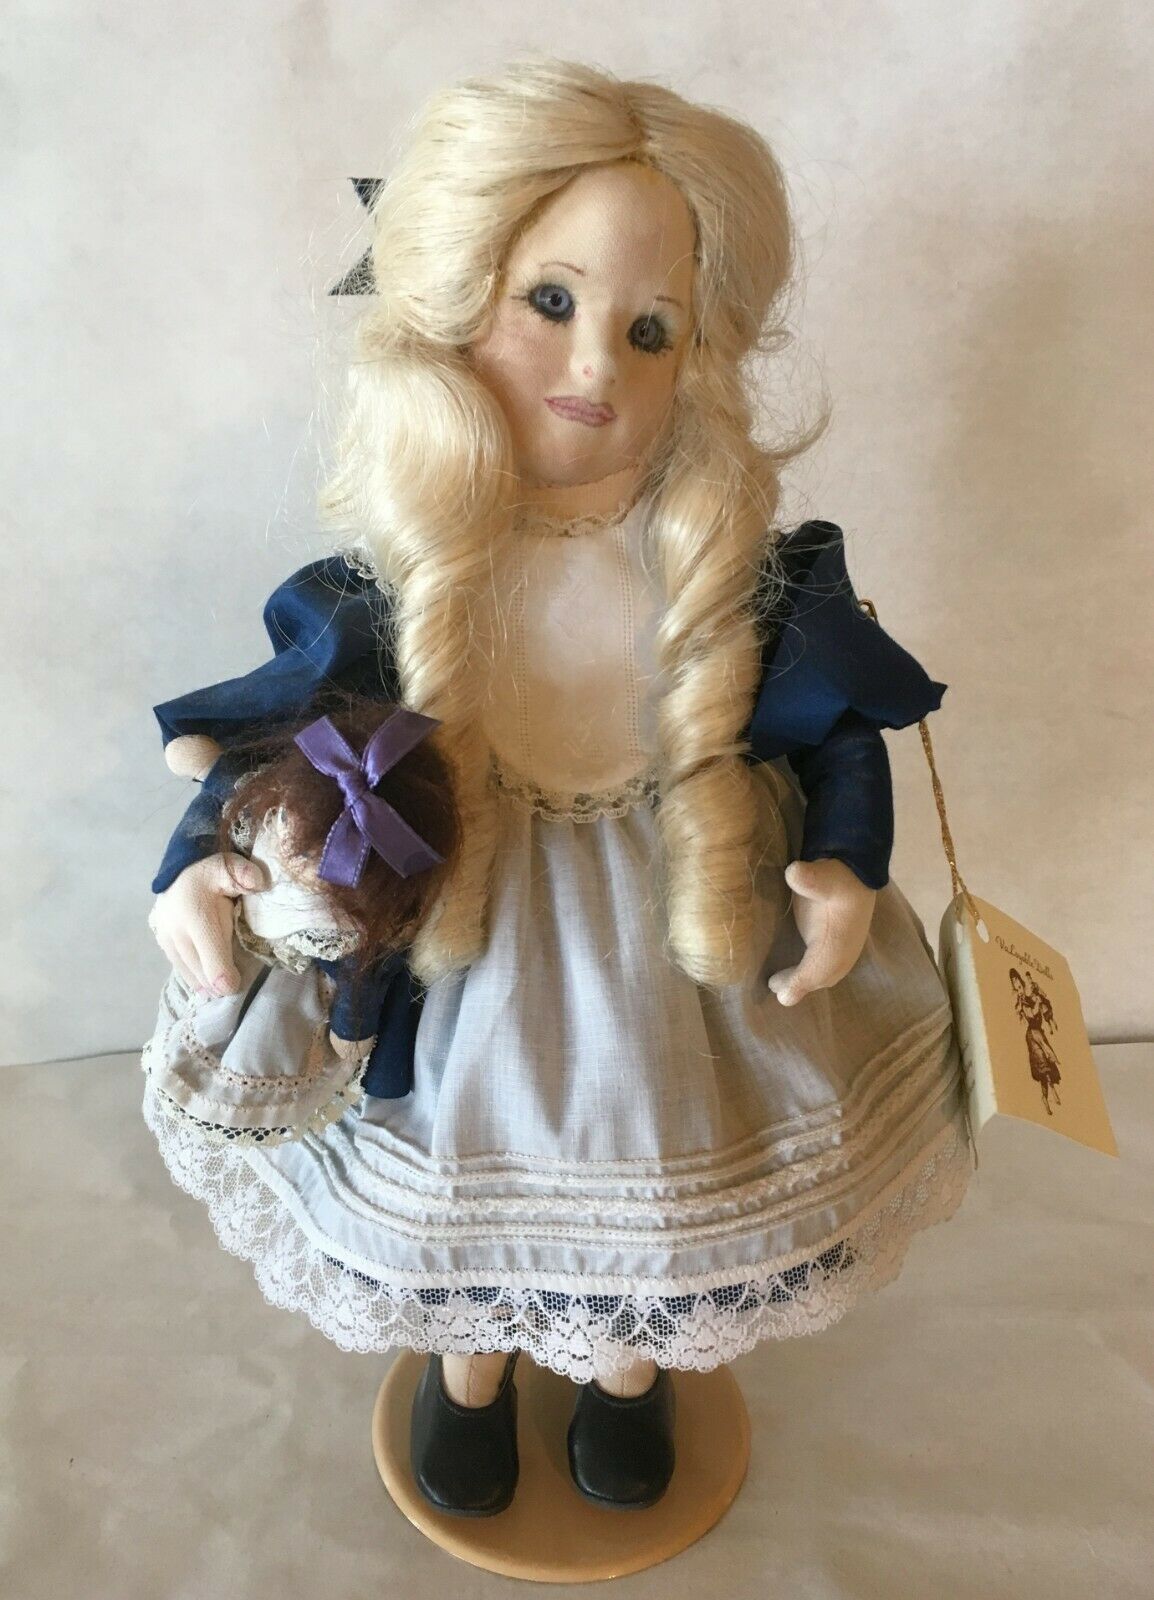 Valoyable Dolls Sarah From The Little Princess 15" Soft Sculpted Doll Glass Eyes